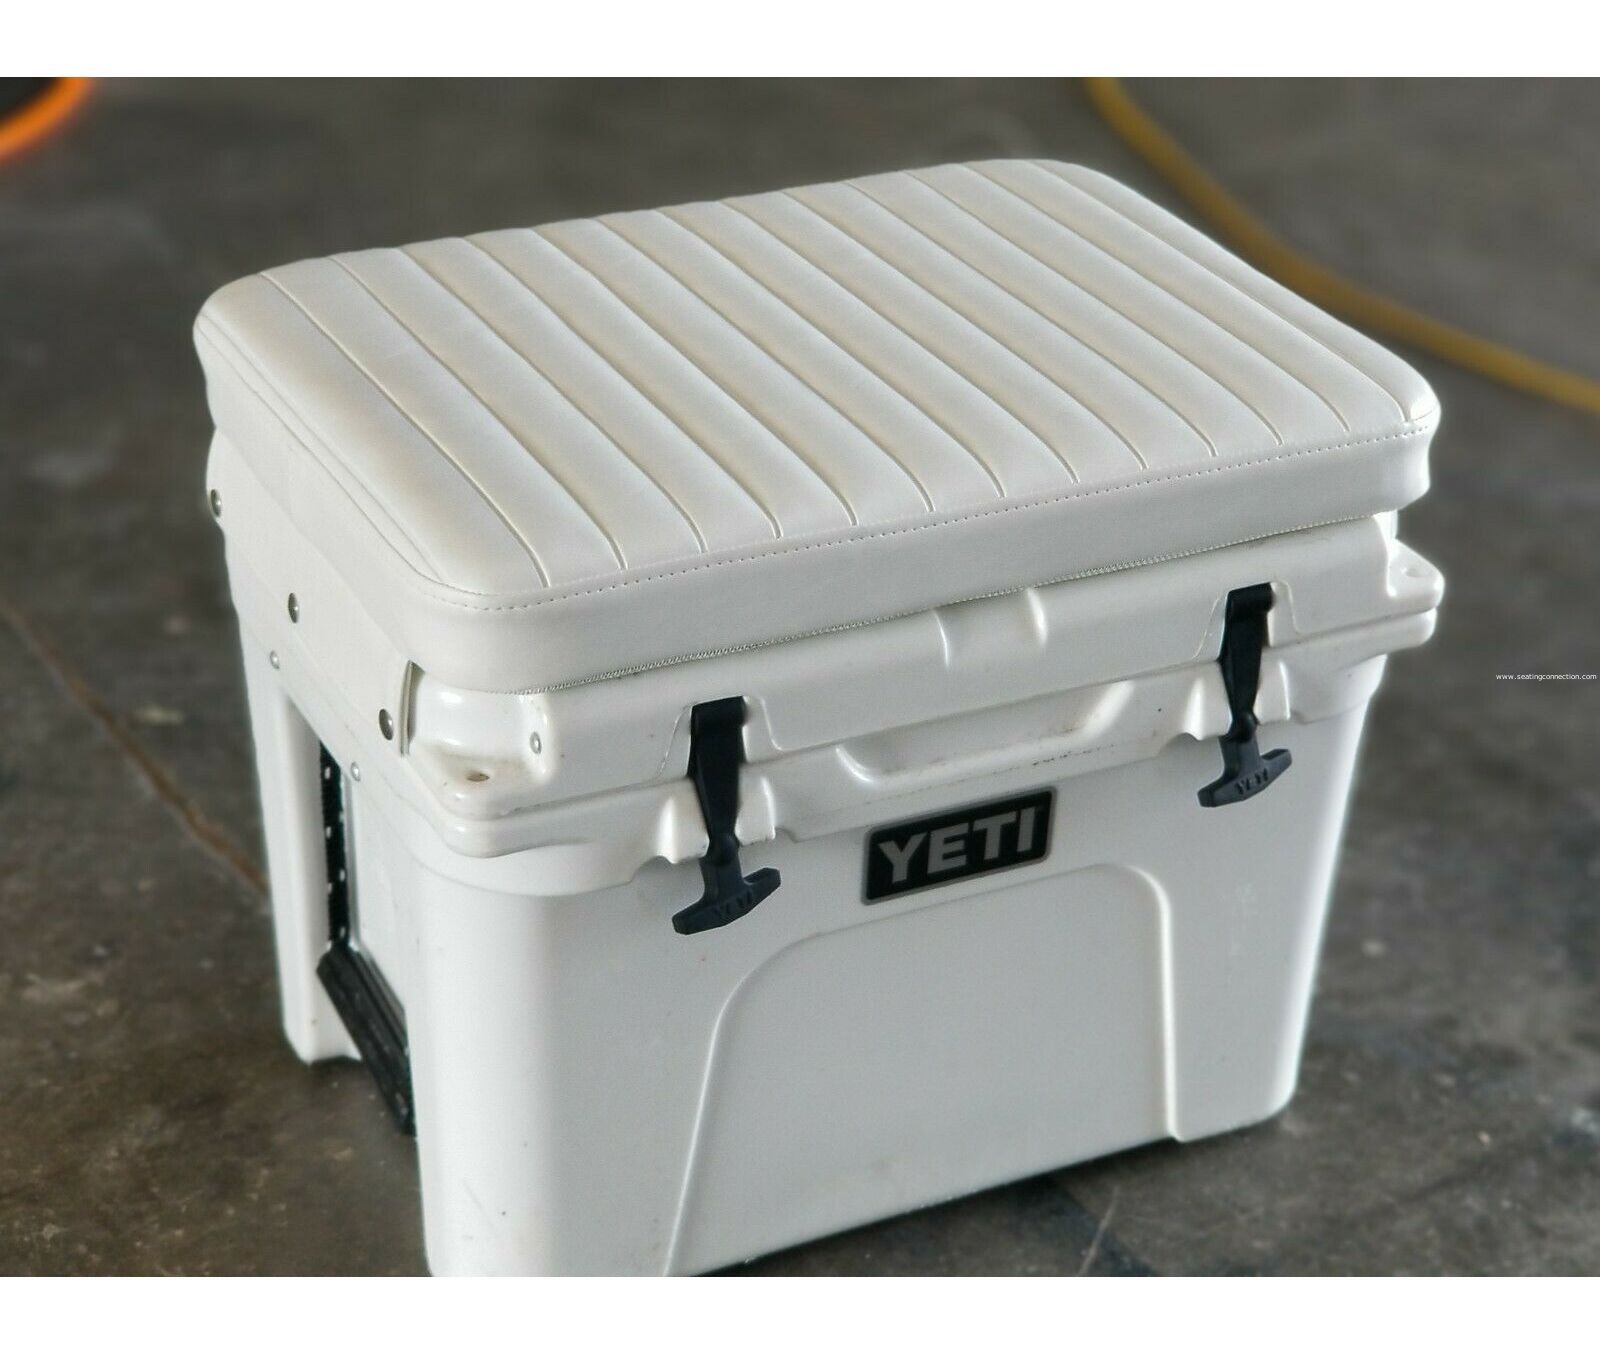 Cooler Seat Cushion for Yeti Tundra 45 Cooler (Cushion Only)